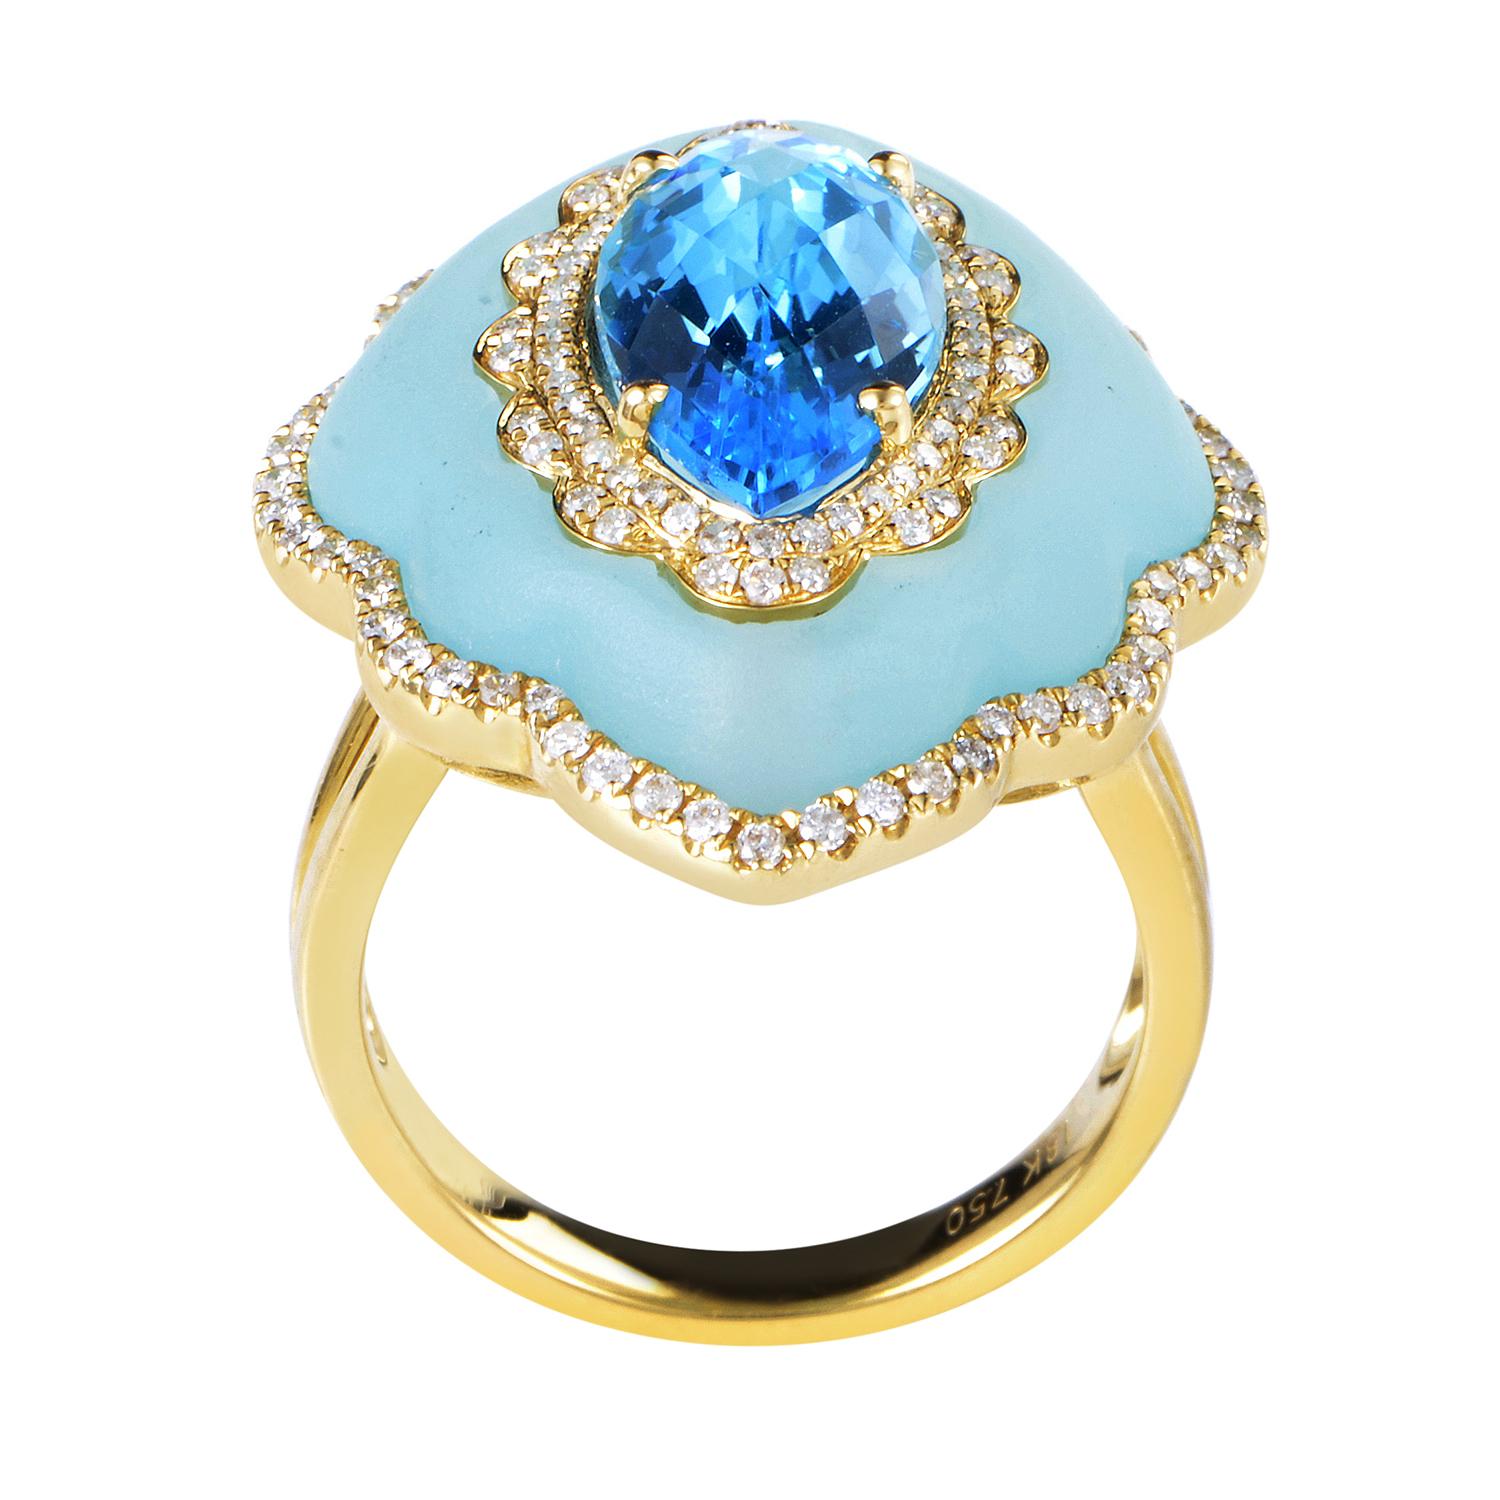 The watery glisten and majestic sparkle of the mesmerizing topaz stone are complemented by the luxurious glitter of diamonds totaling 0.54ct, while its magnificent nuance is complemented by the blue quartz weighing 22.76 carats in this spellbinding